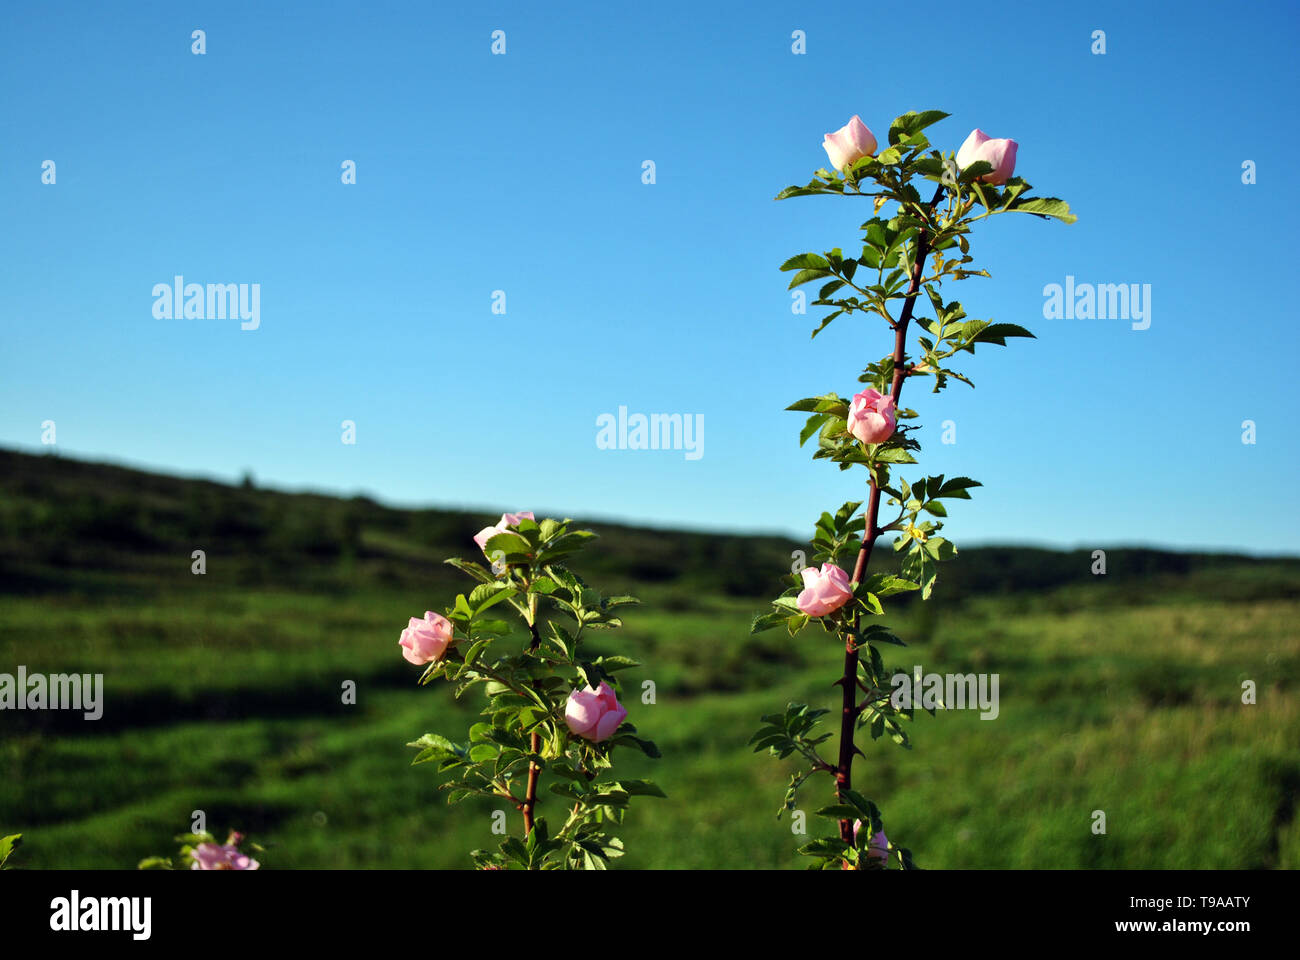 Wild roses bush with pink flowers on hill, landscape background with bright blue sky Stock Photo